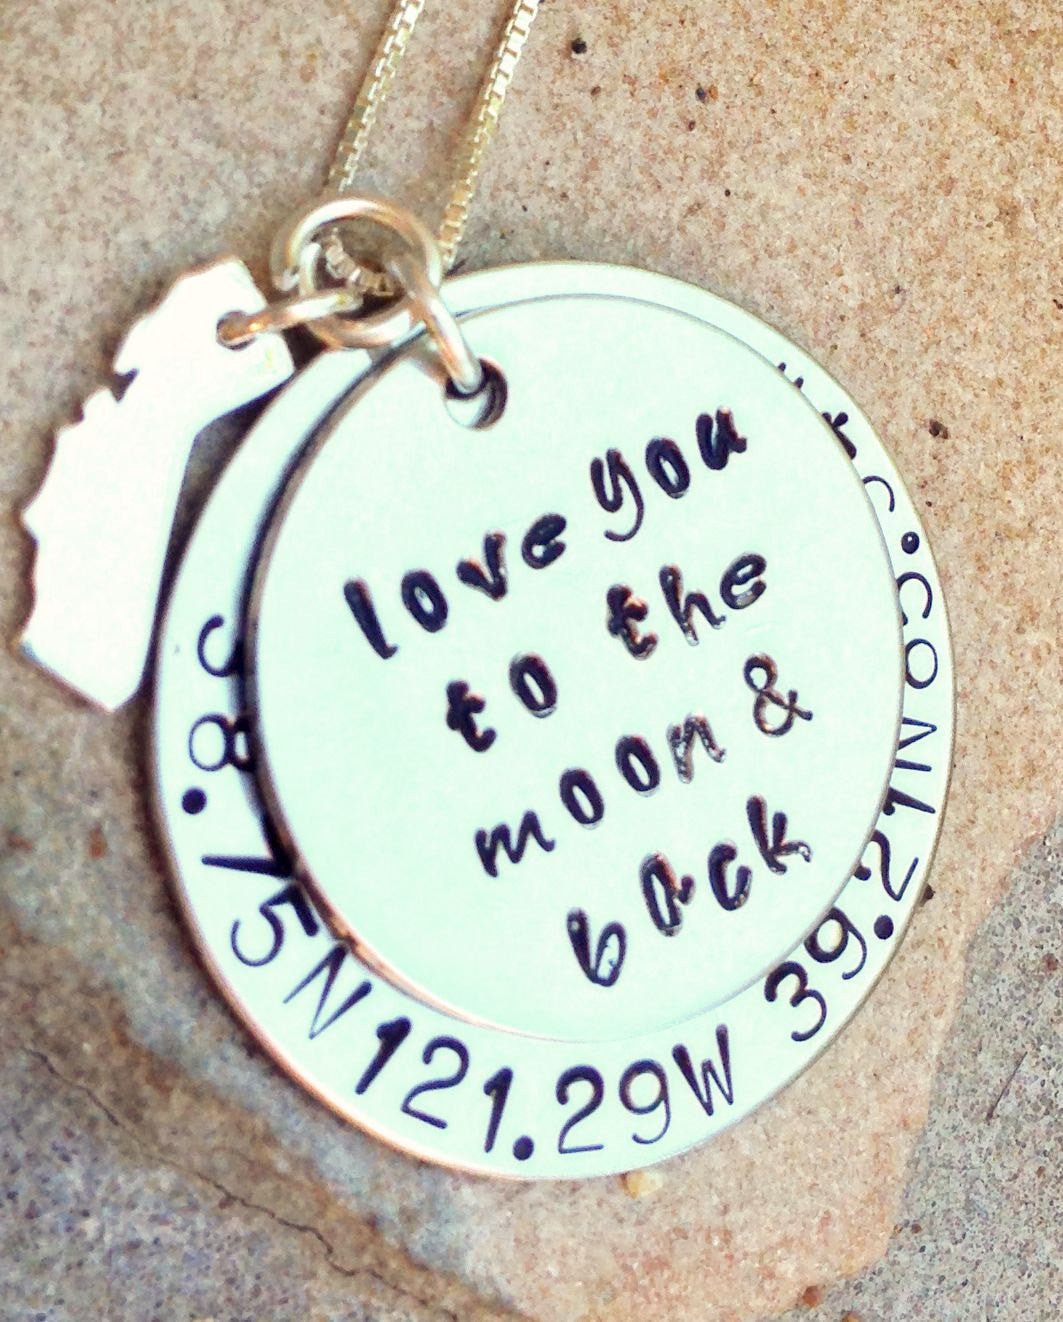 love you to the moon and back, coordinate necklace, personalized necklace, coordinate and state necklace, natashaaloha - Natashaaloha, jewelry, bracelets, necklace, keychains, fishing lures, gifts for men, charms, personalized, 